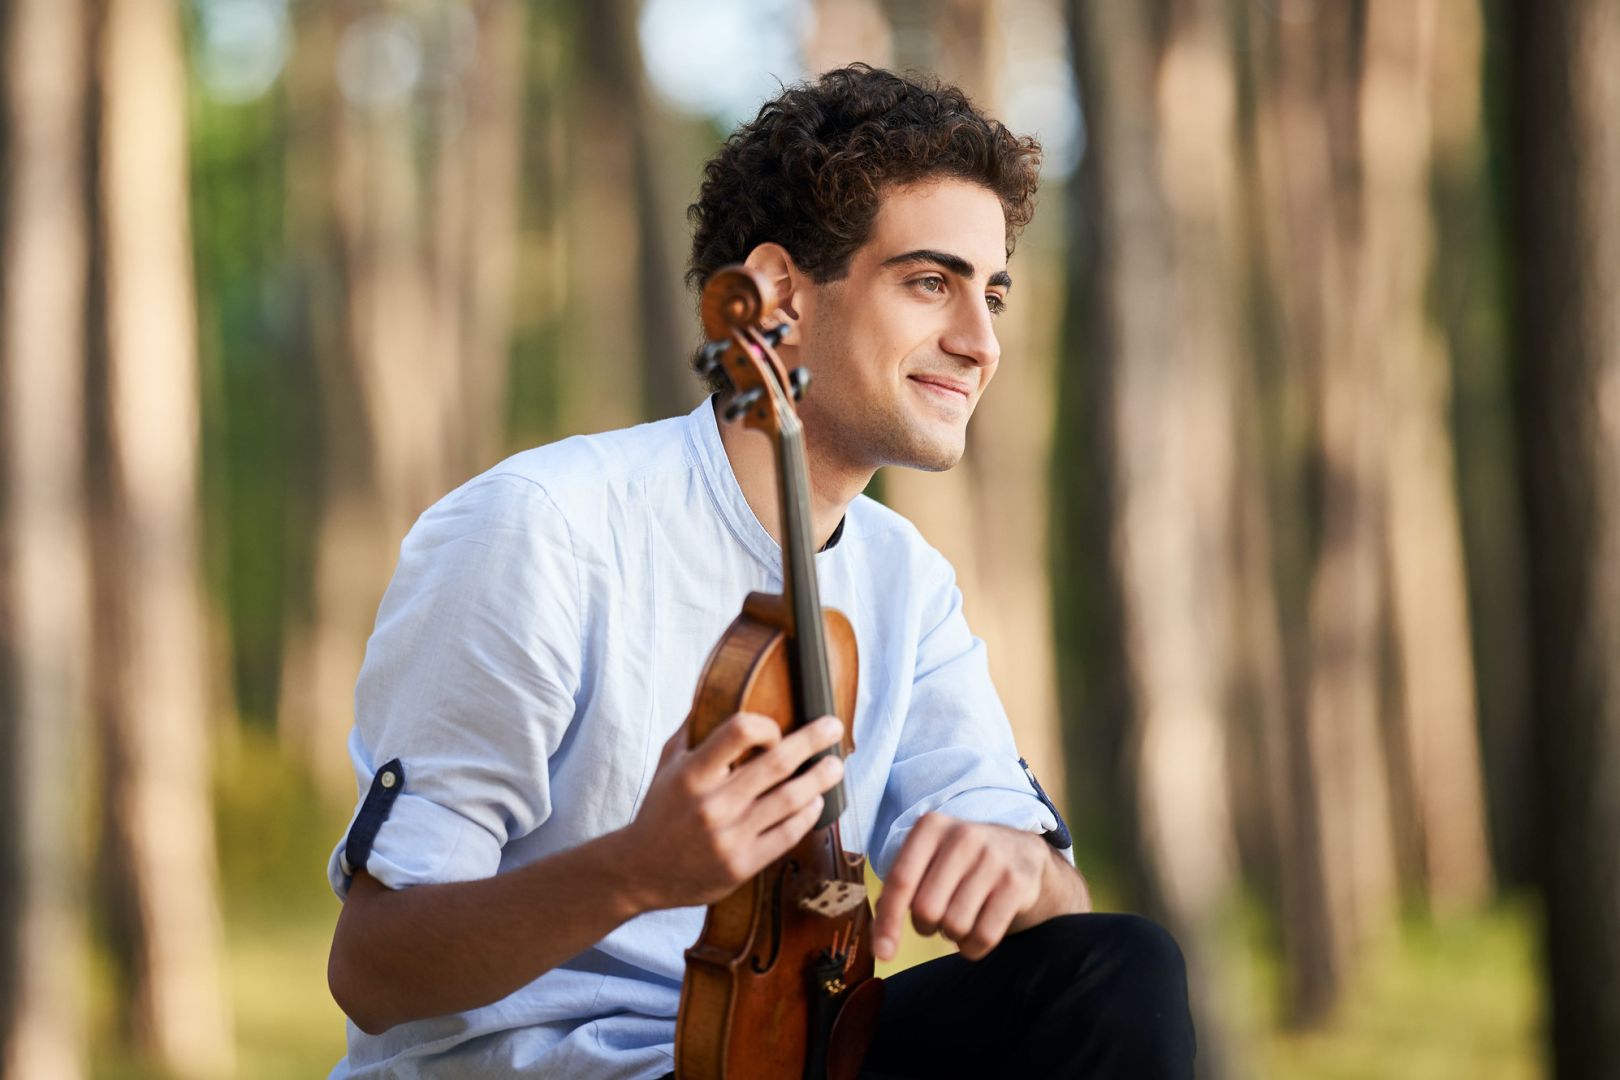 Eminent violinist to give concert in Russia